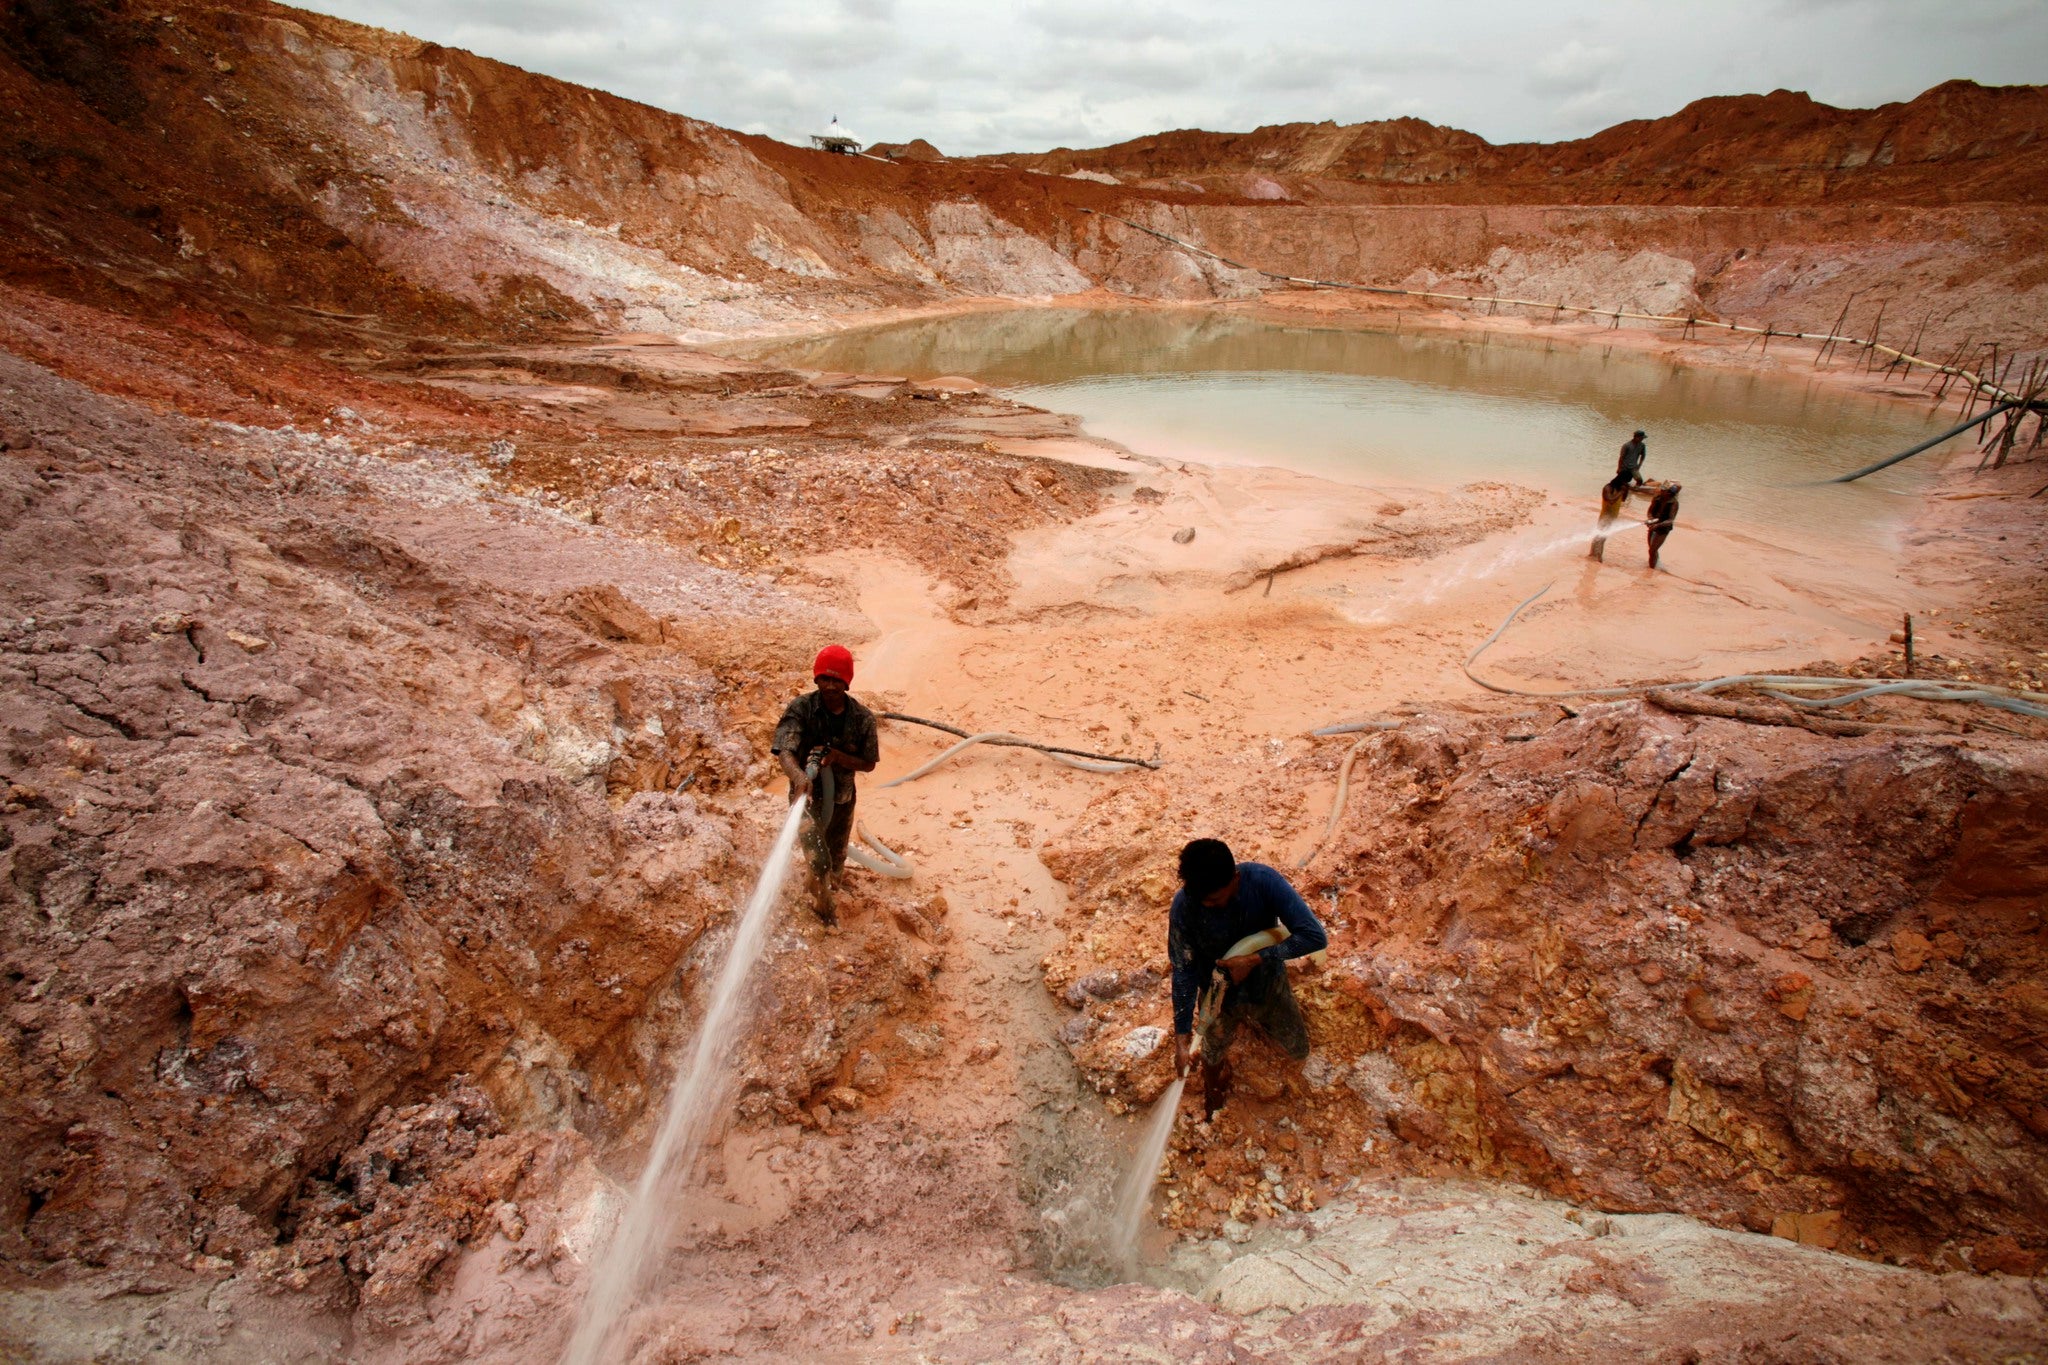 Indonesian miners hose down a mining site as they sort out tin ore from sand on Bangka island February 21, 2007. REUTERS/Beawiharta